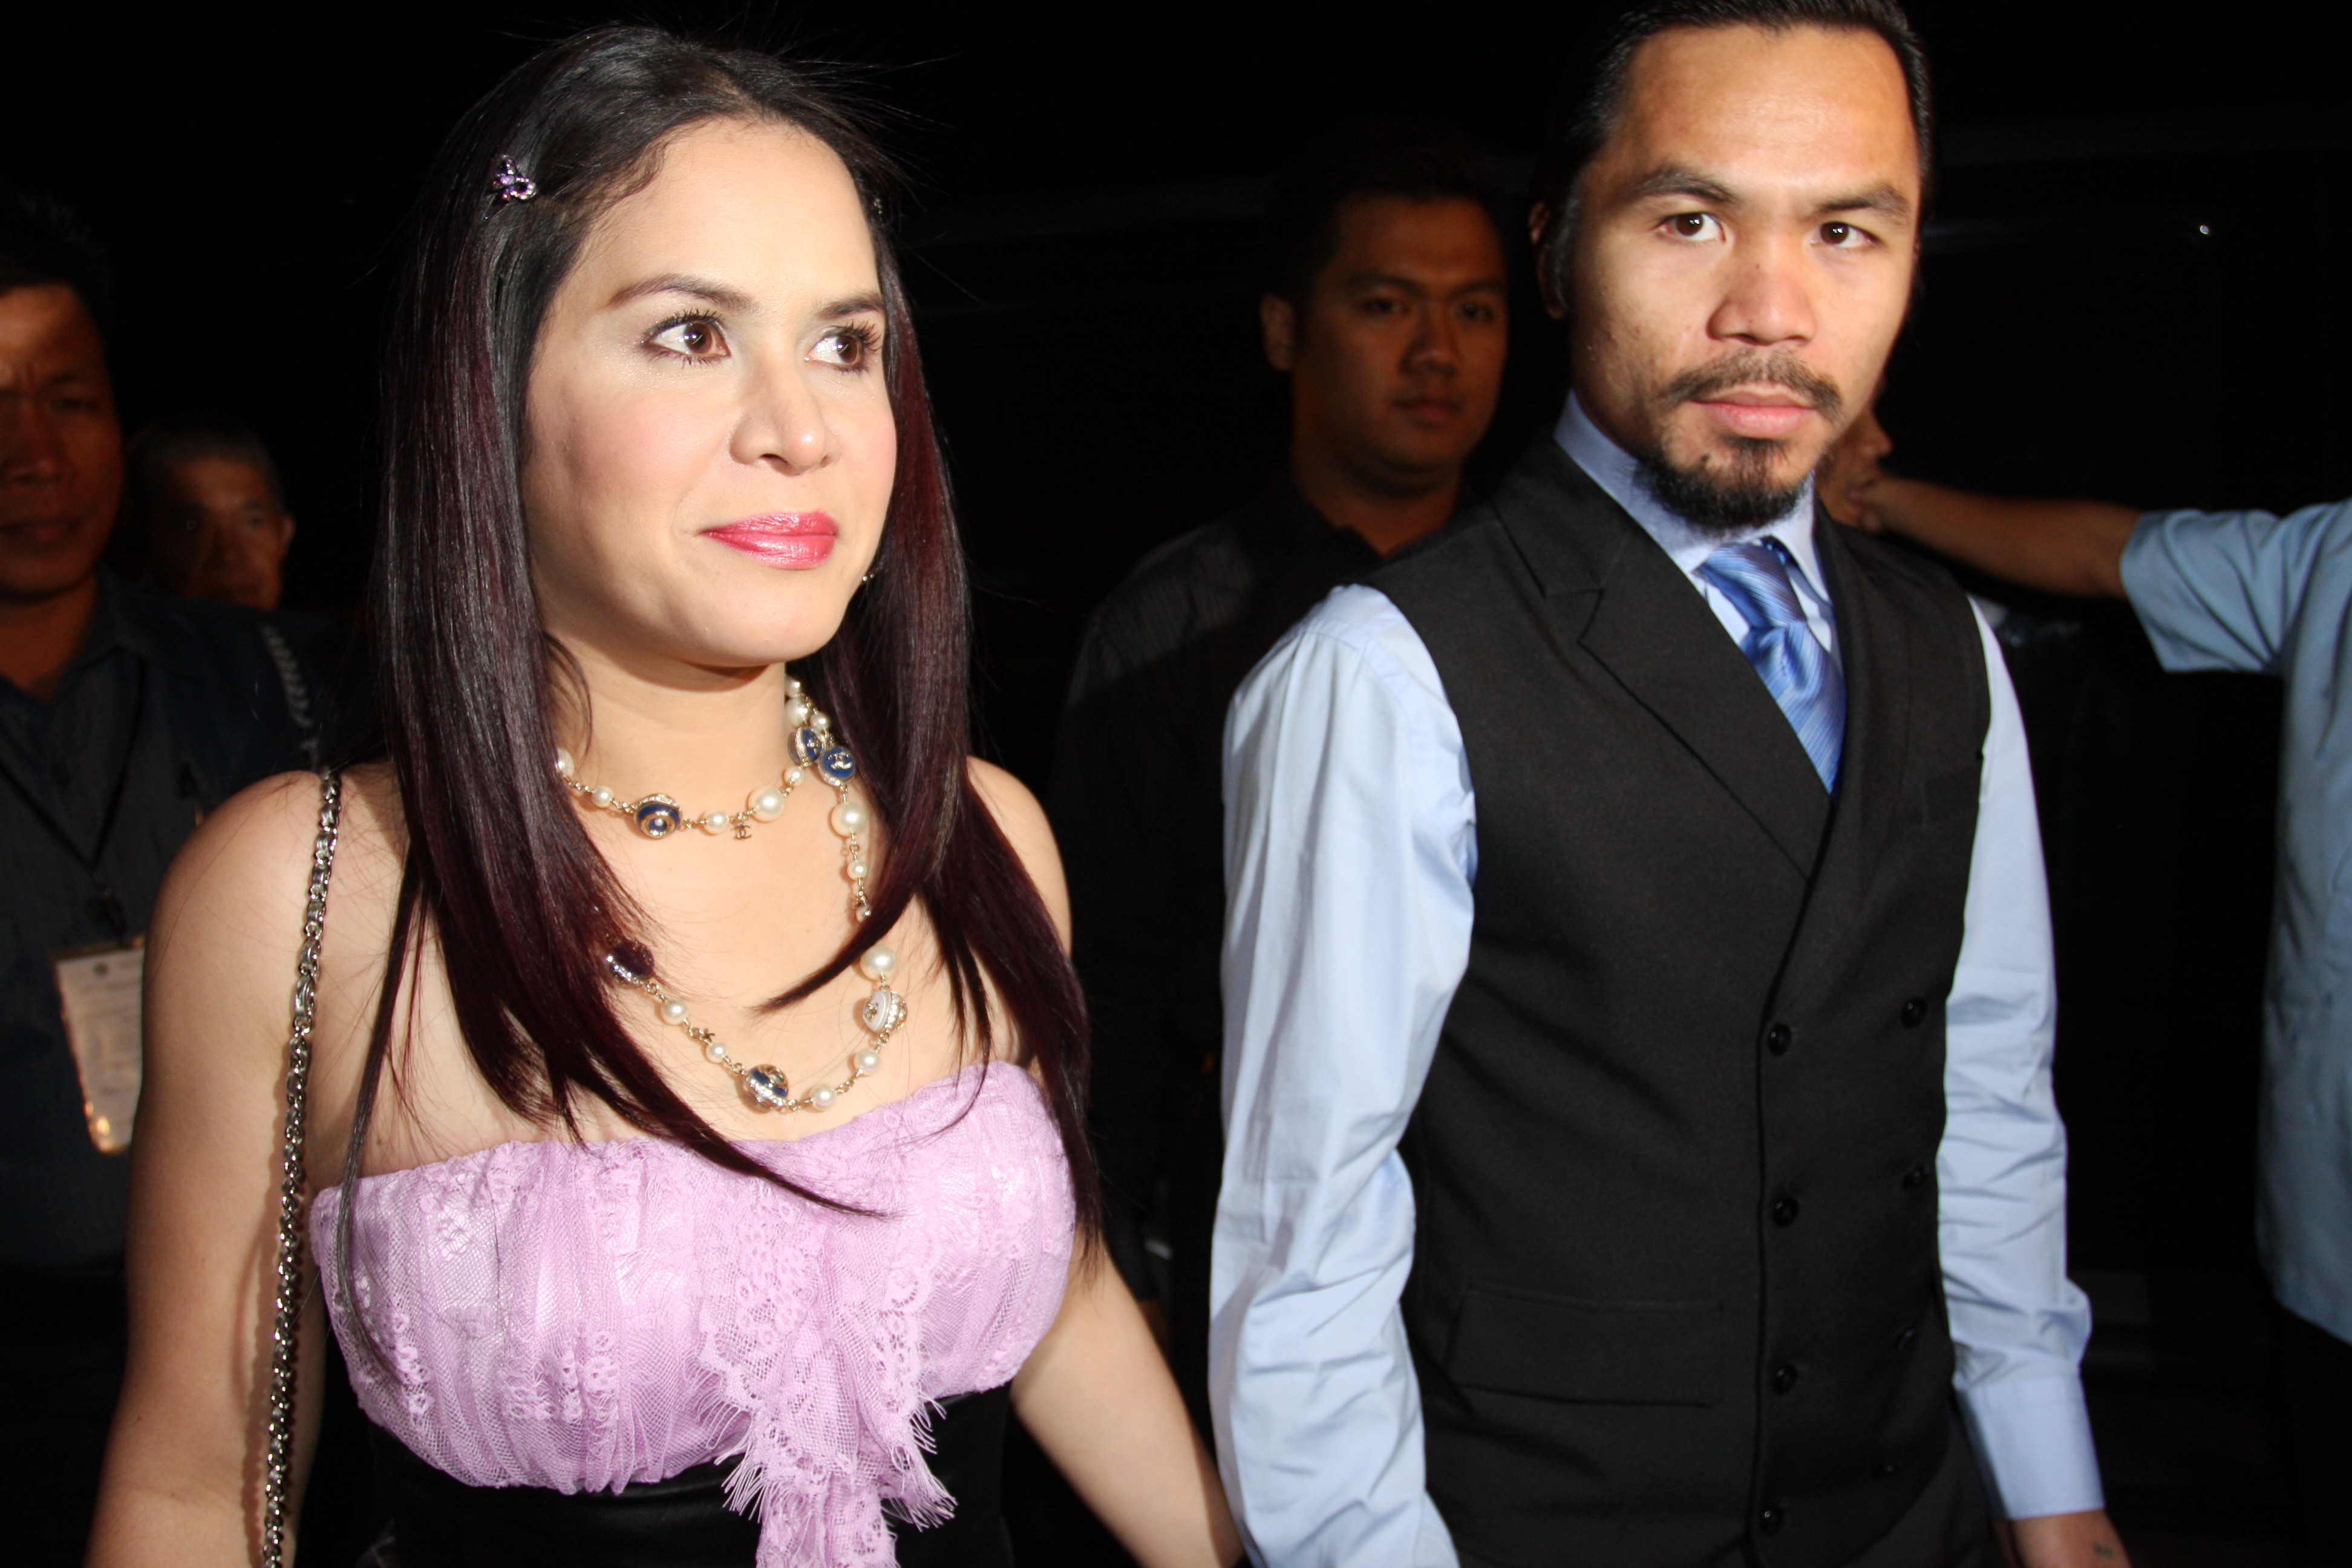 Jinkee Pacquiao, Manny's Wife: 5 Fast Facts You Need to Know